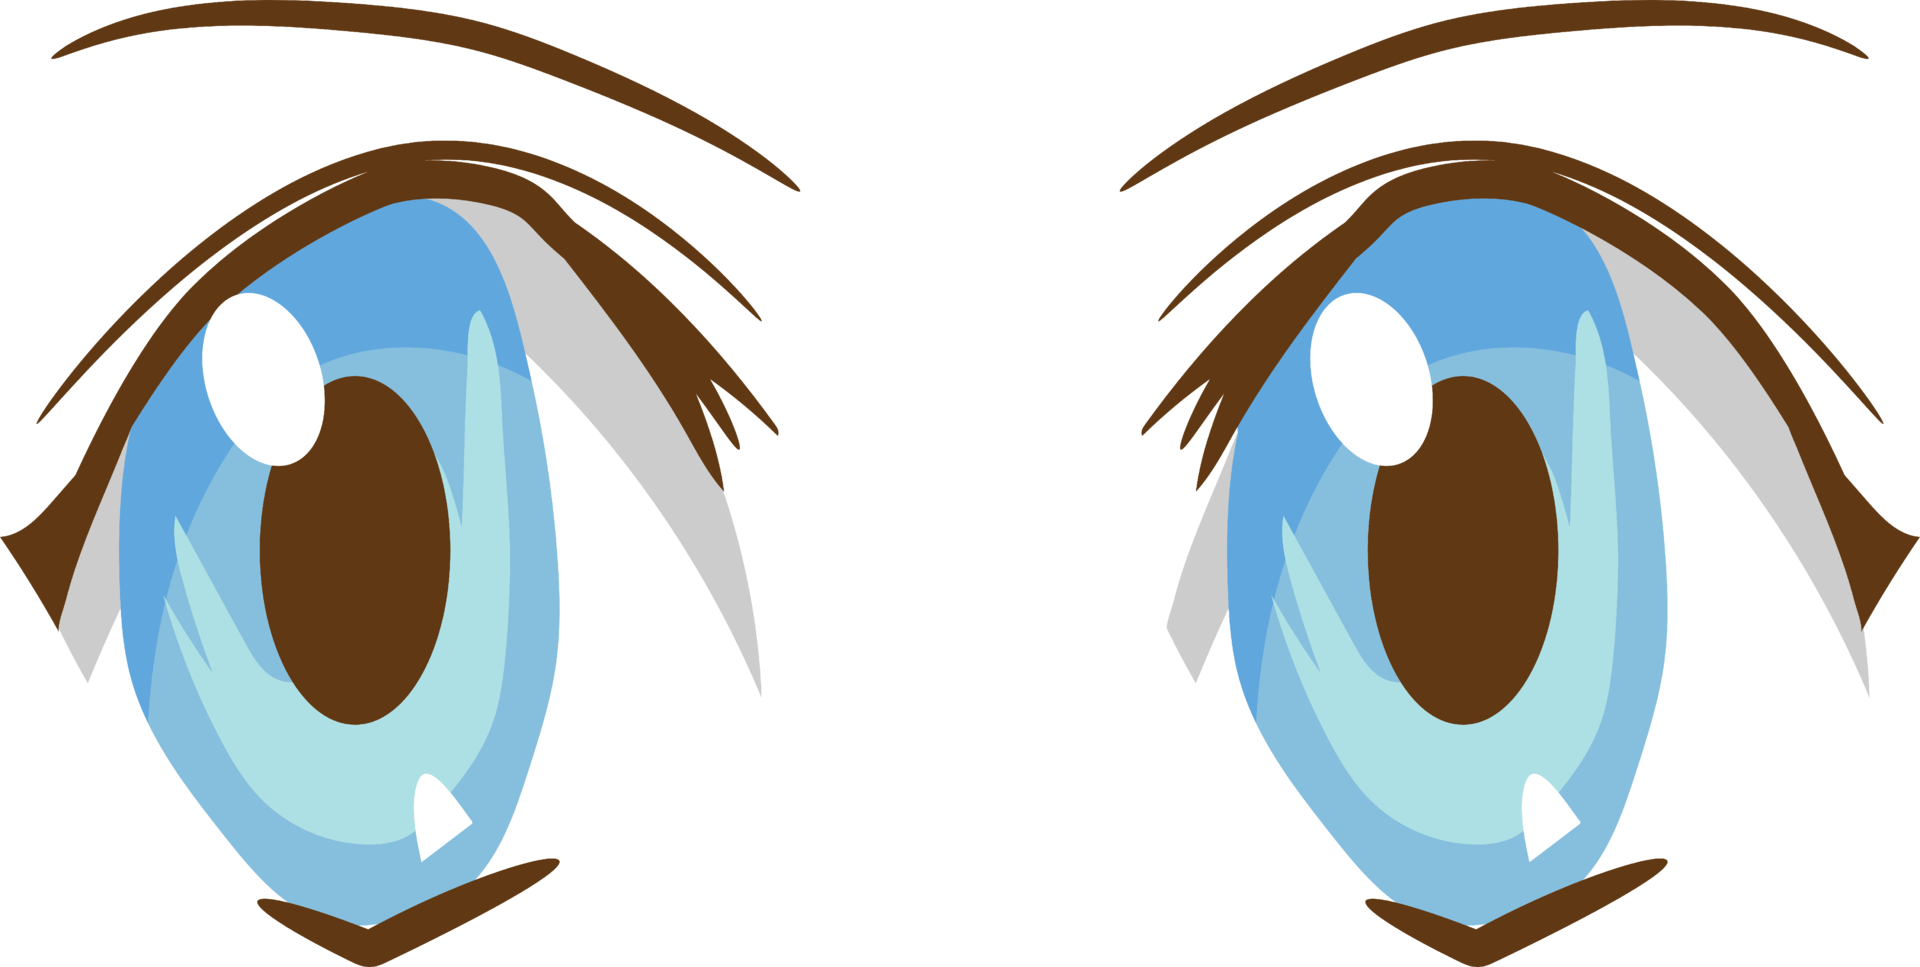 File:Bright anime eyes.png - Wikipedia